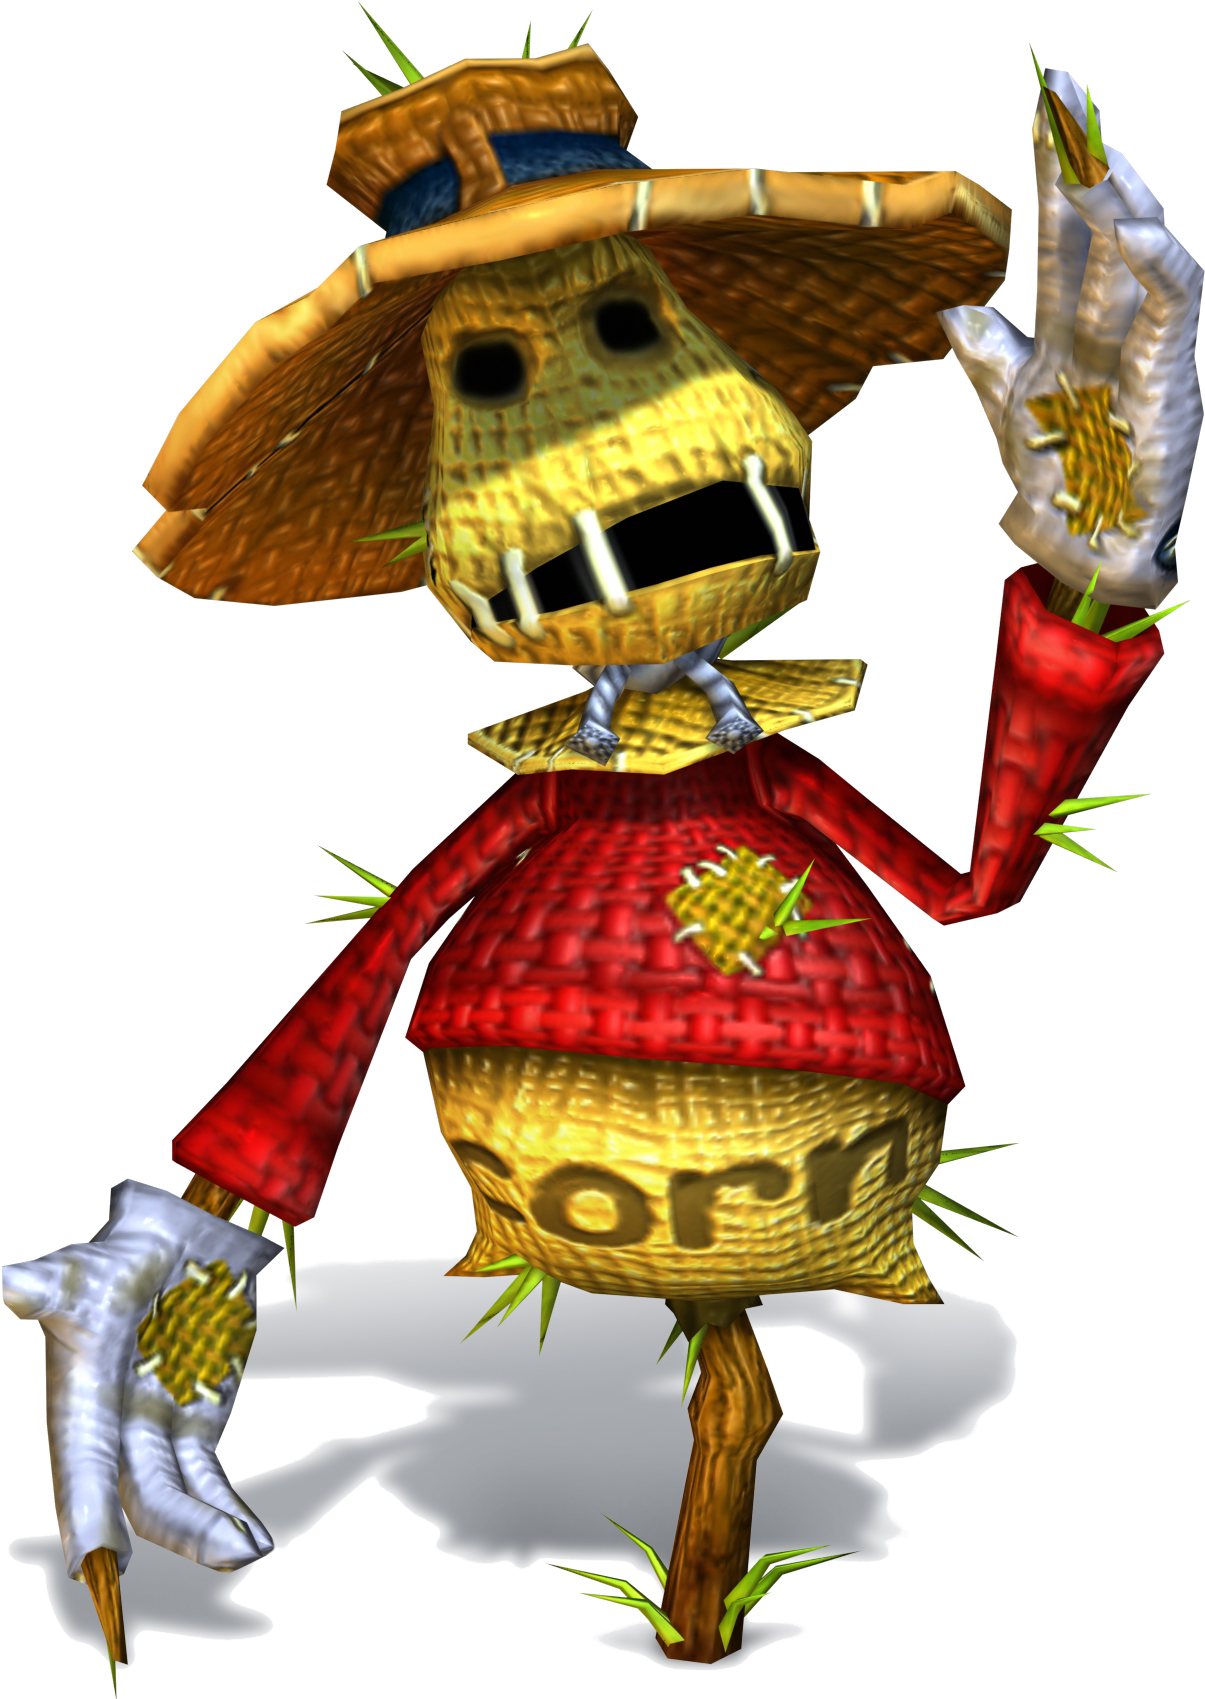 Conker's Bad Fur Day - Conker Bad Fur Day Buga, Hd Png Download